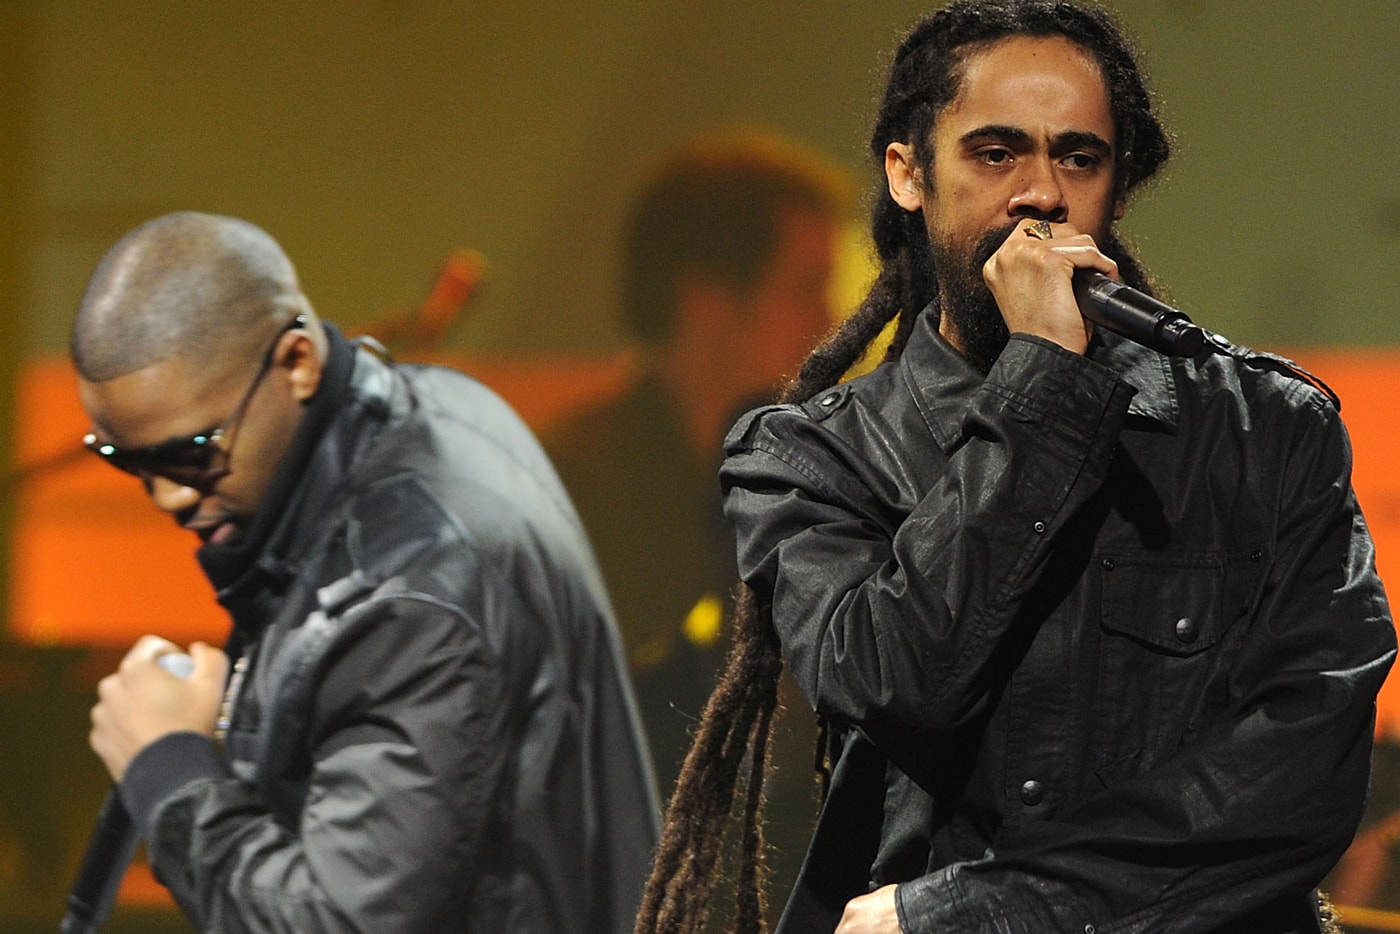 nas-damien-marley-featuring-dennis-brown-land-of-the-promise